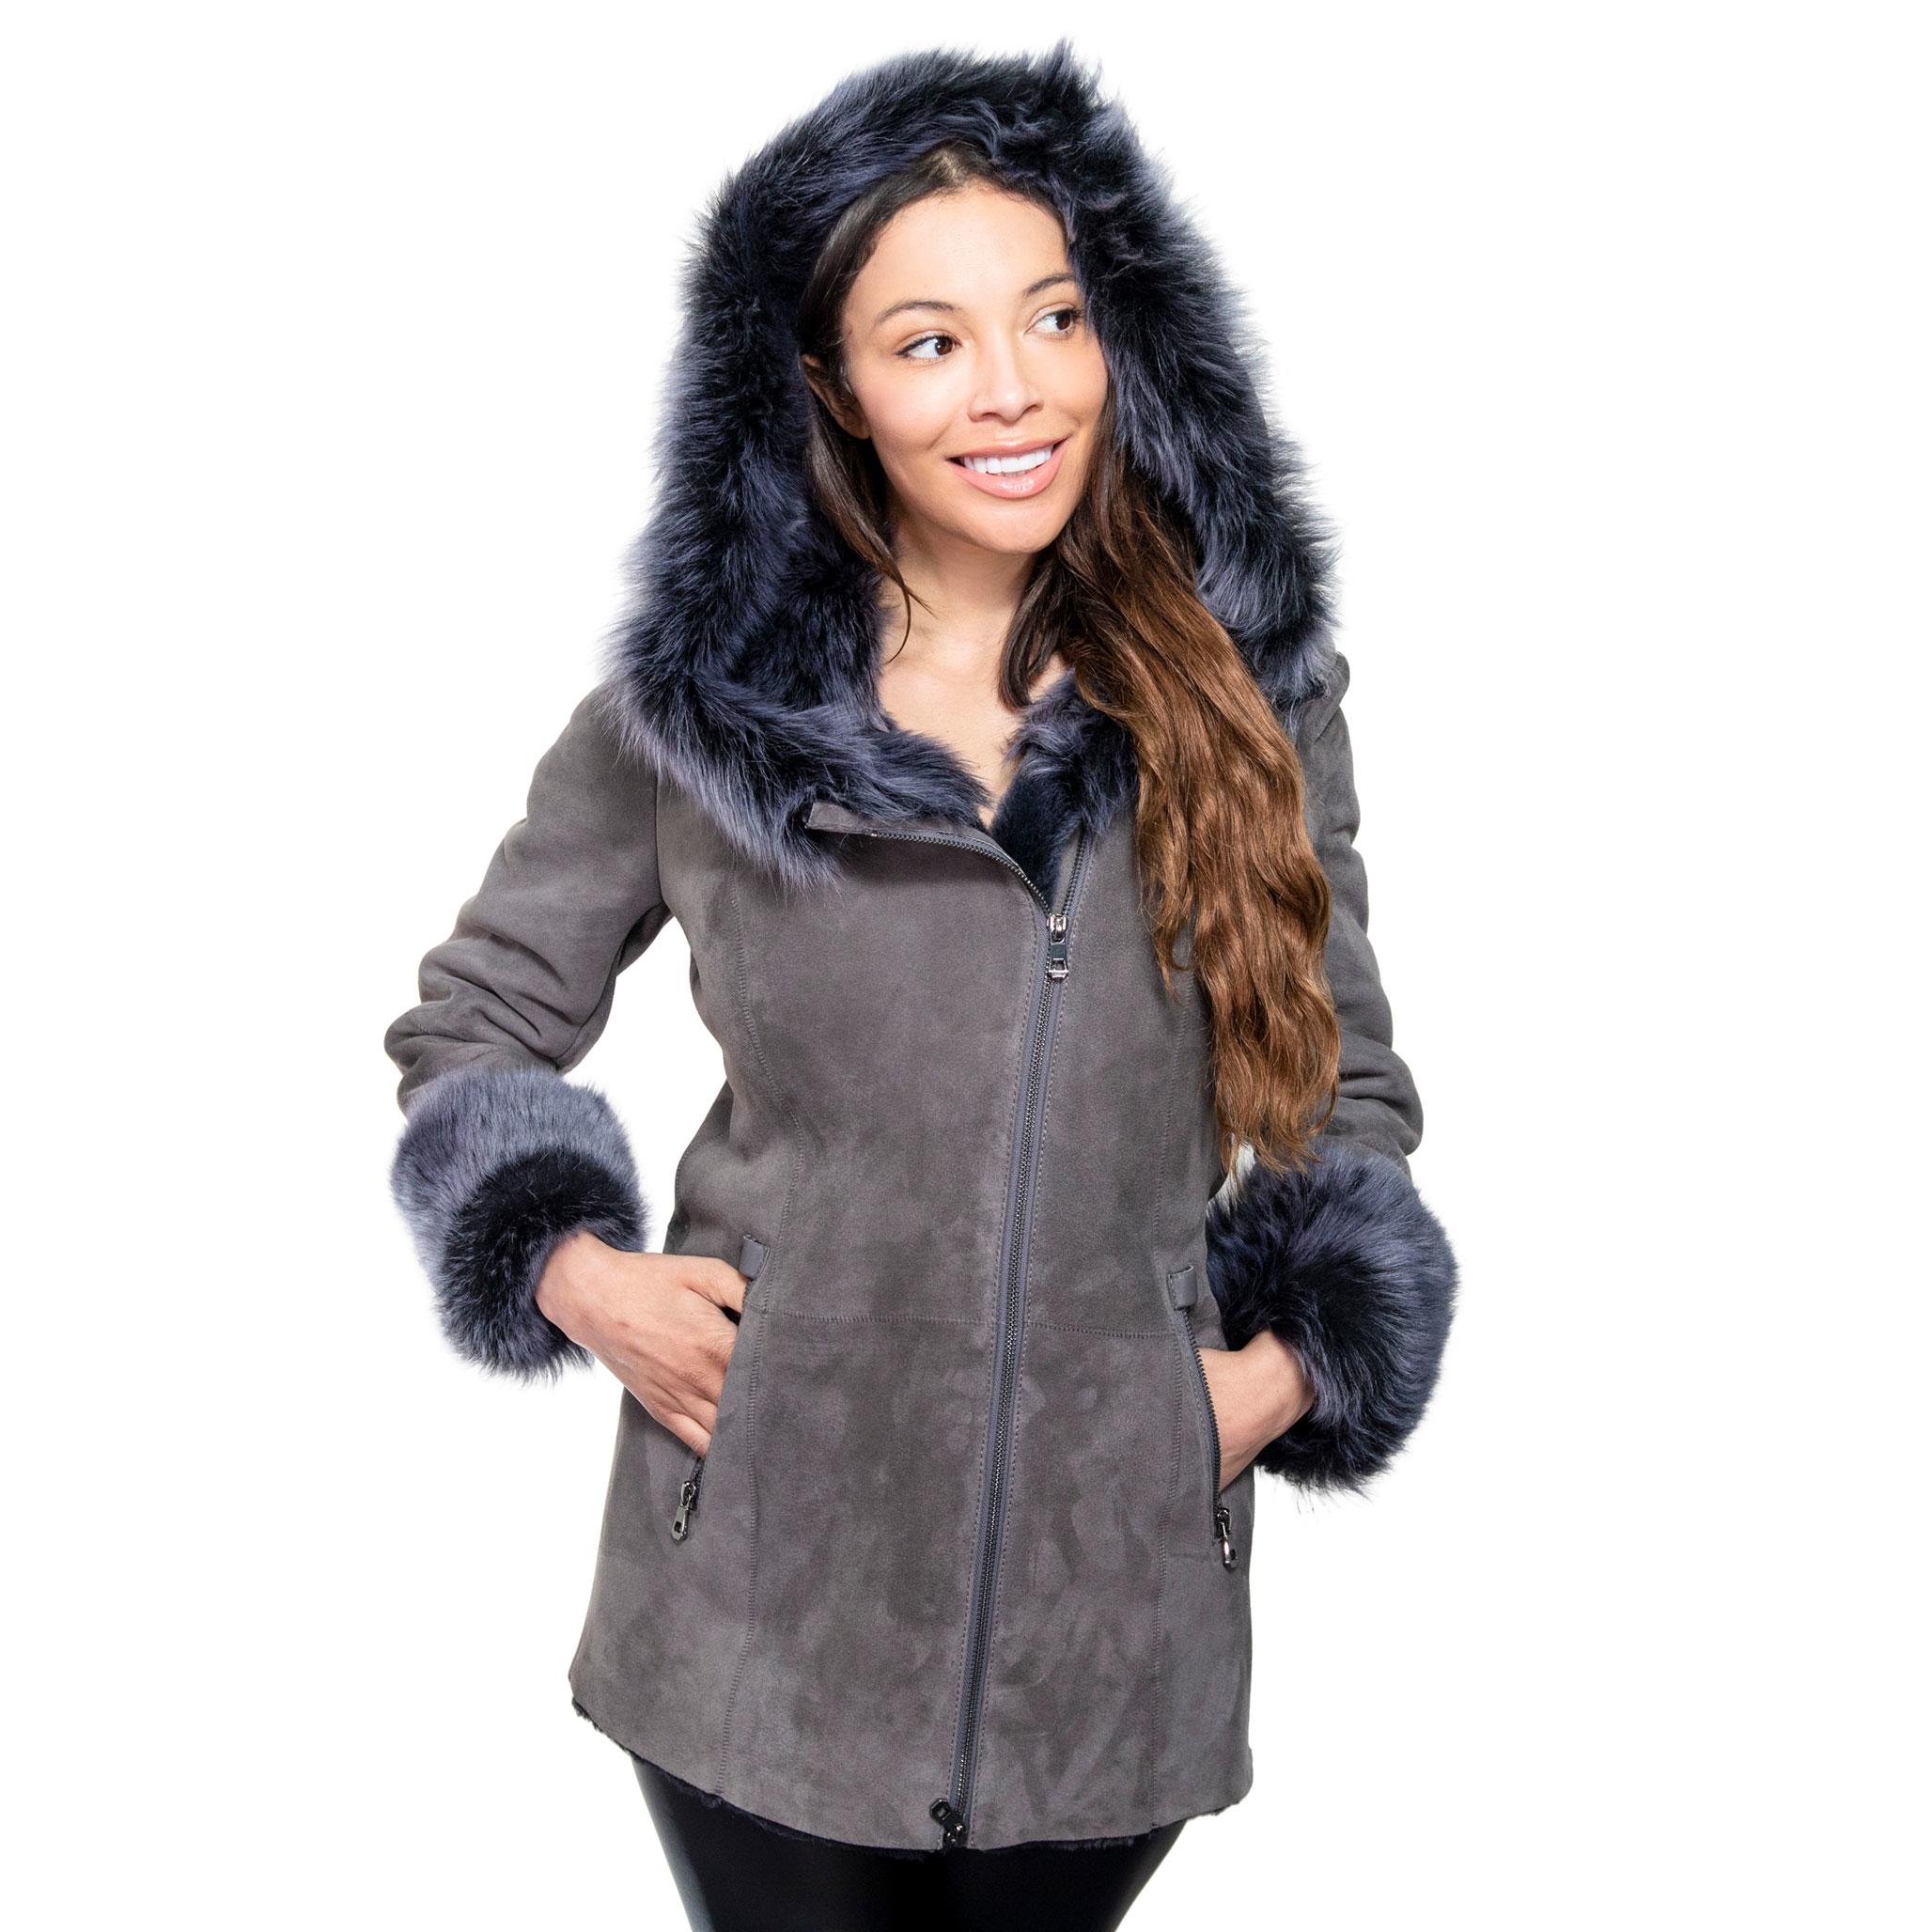 A luxury womens Sheepskin coat with a suede finish. Hood, collar, and cuffs feature beautiful long toscana fur. Grey in colour.